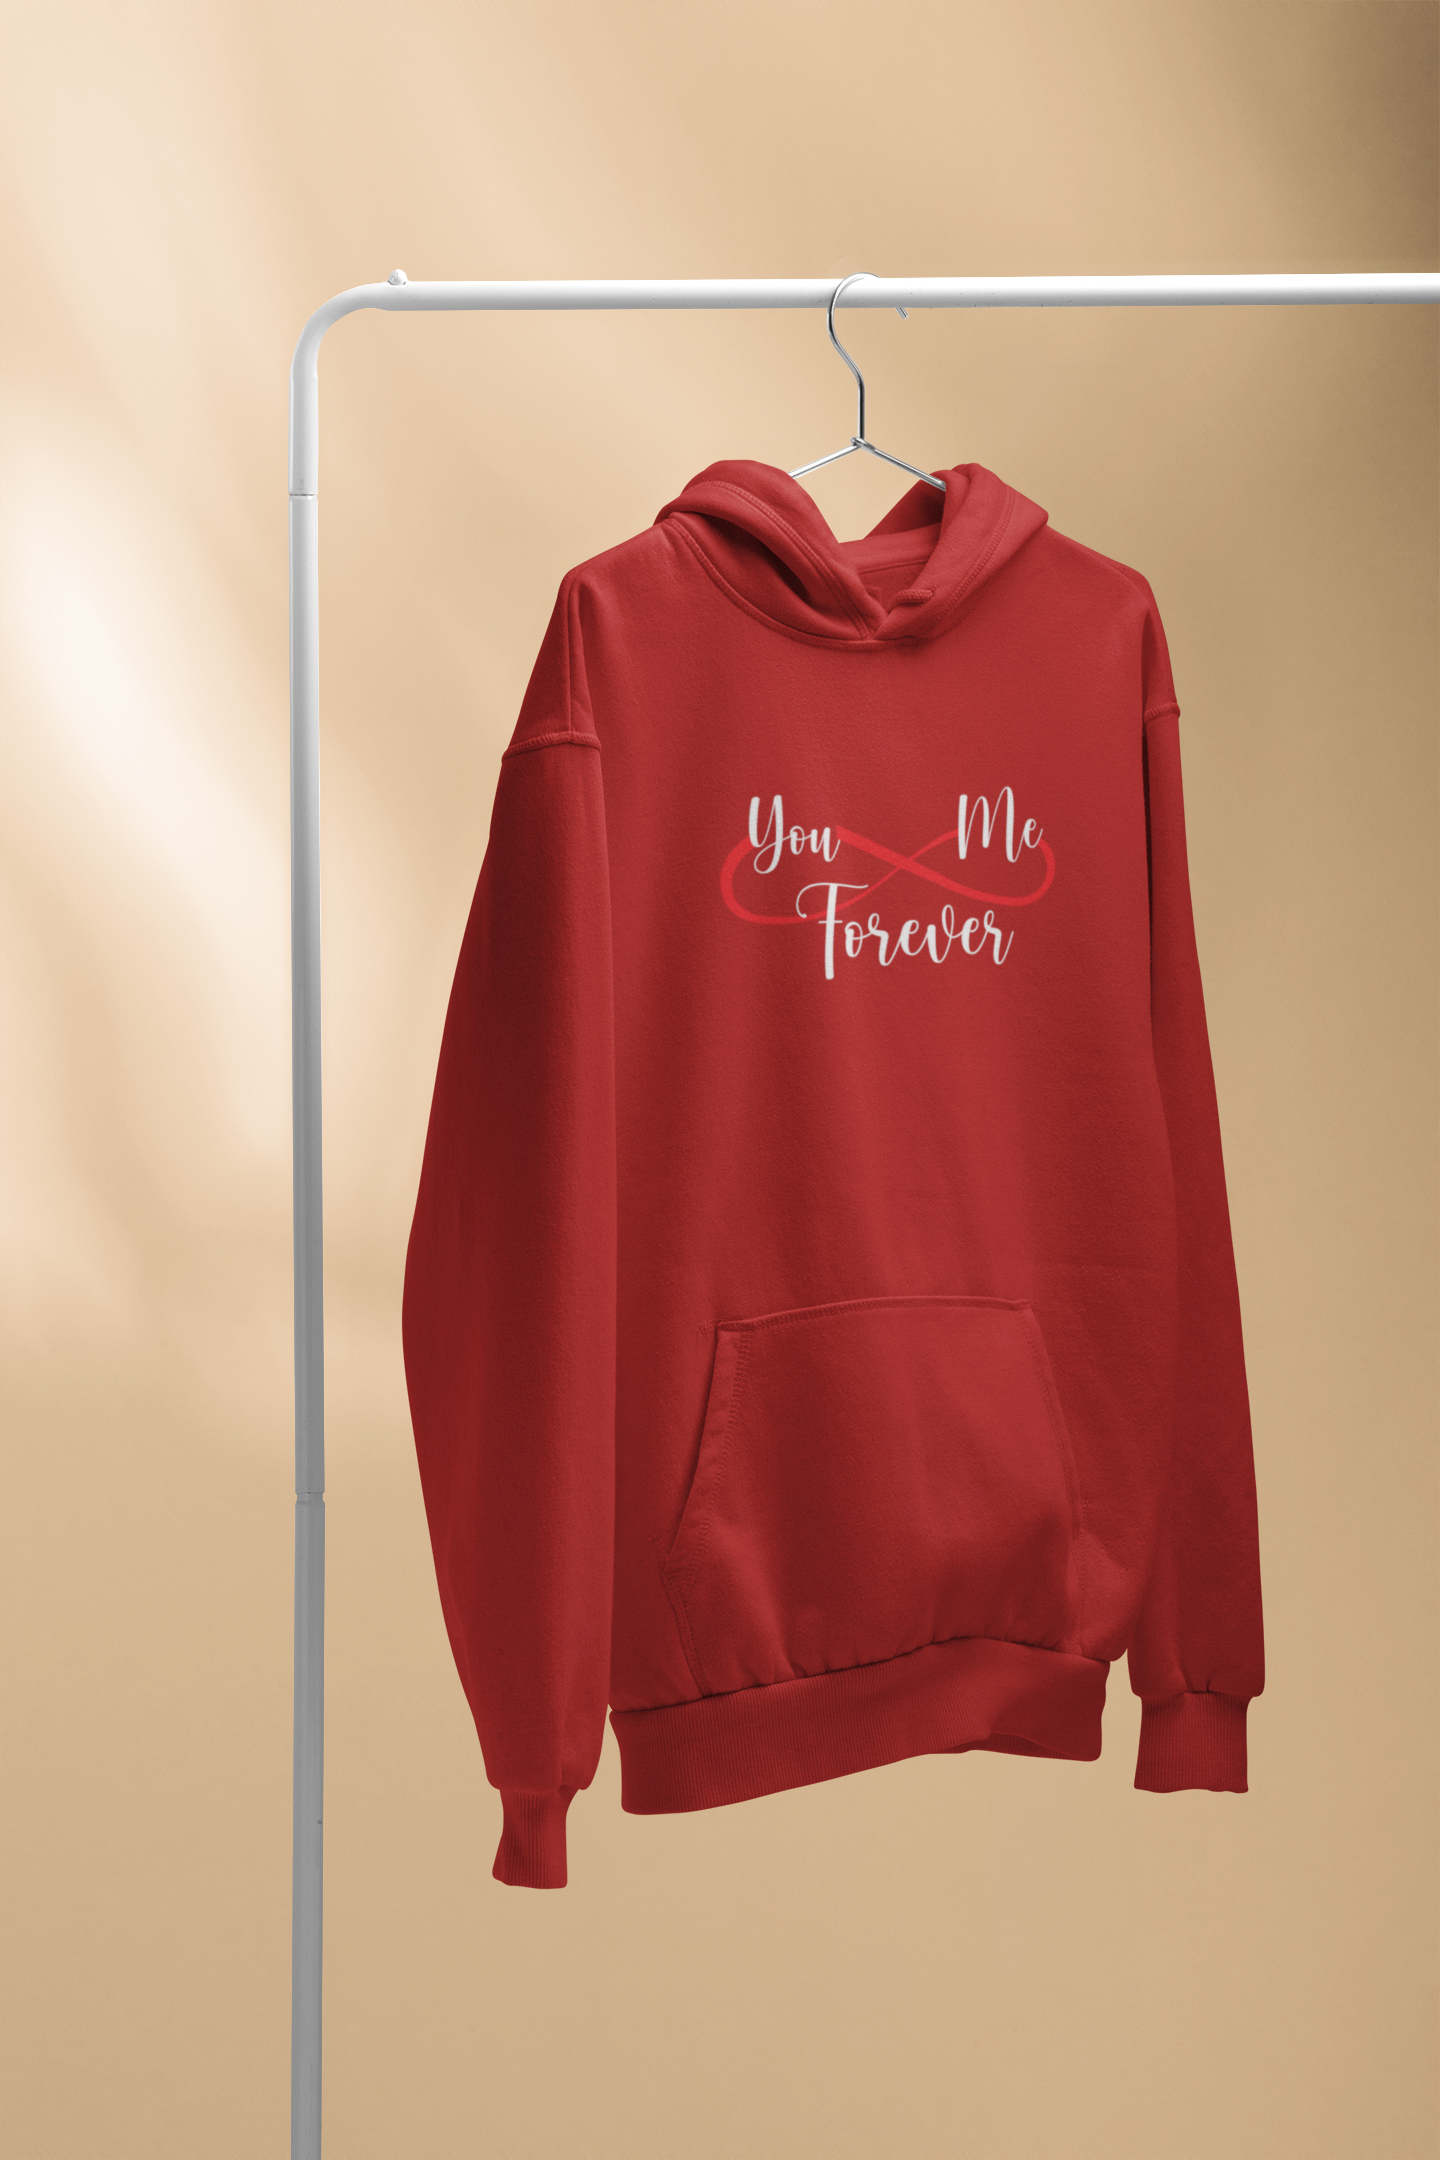 U And Me Forever Couple Hoodie-FunkyTradition